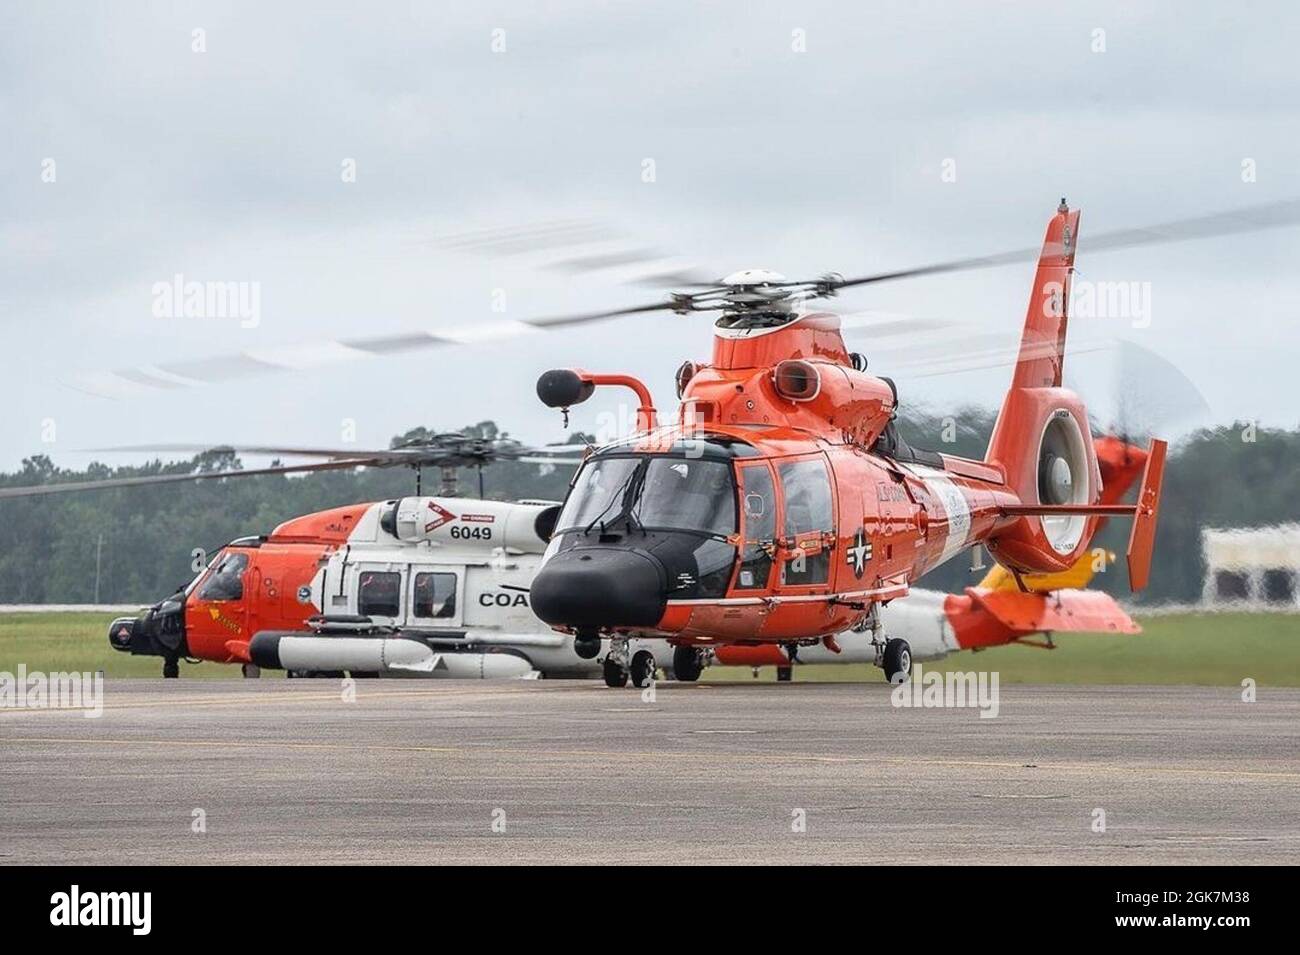 An MH-65 Dolphin helicopter crew conduct a training flight at Aviation Training Center Mobile in Alabama on Aug. 27, 2021, ahead of Hurricane Ida. Coast Guard crew prepare and relocate aircraft out of the main path of the storm to be ready to respond as soon as the worst passes. Stock Photo